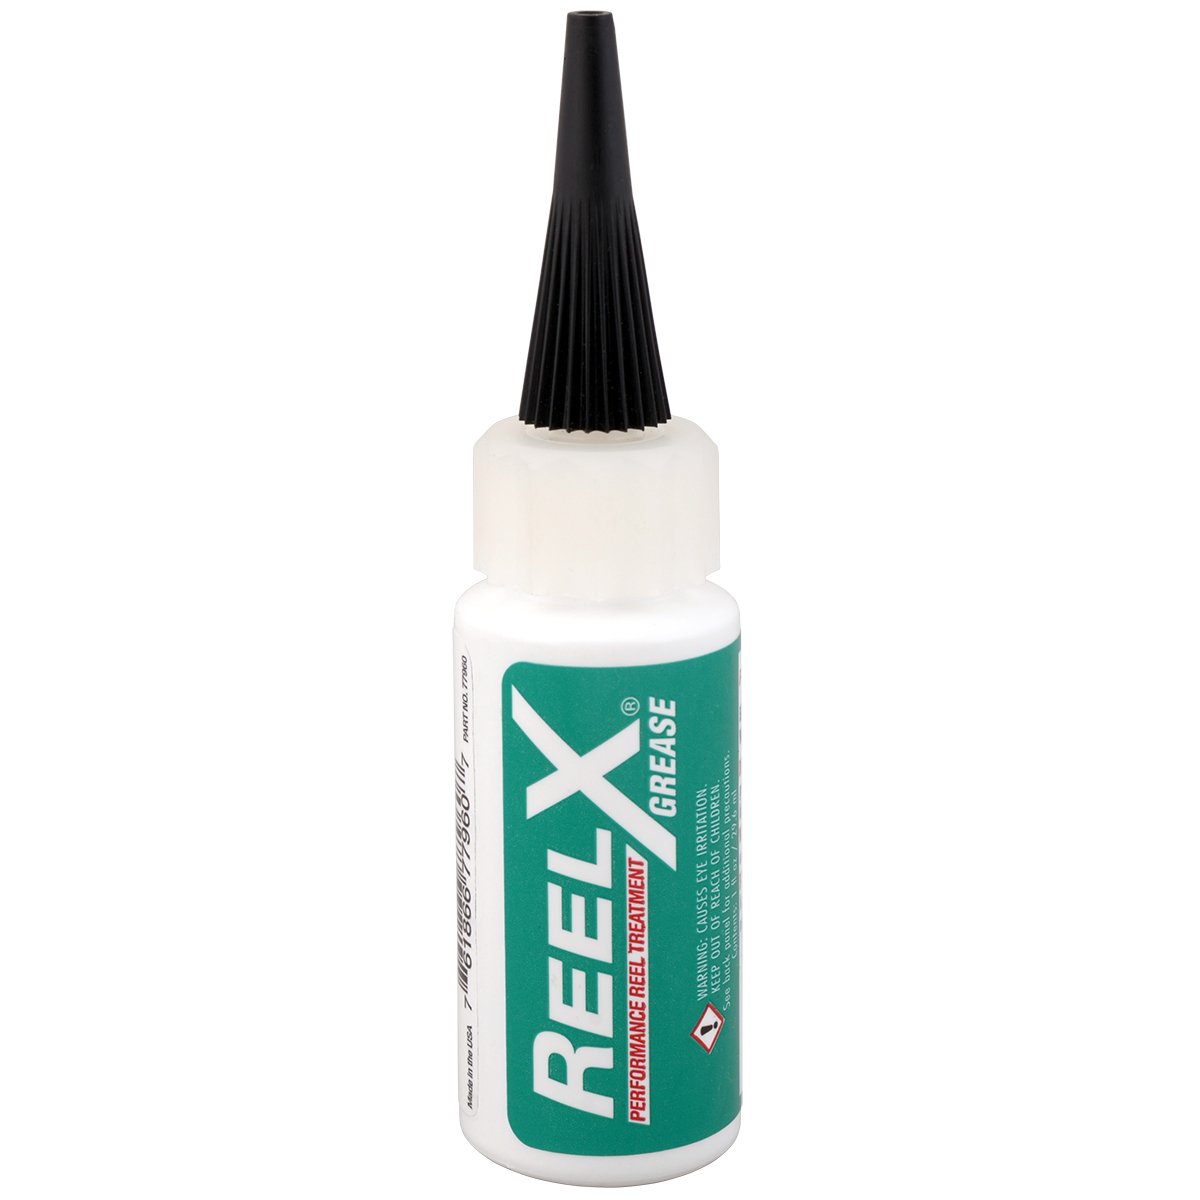 Corrosion Technologies 77960 ReelX Grease Ultimate Fishing Reel Grease